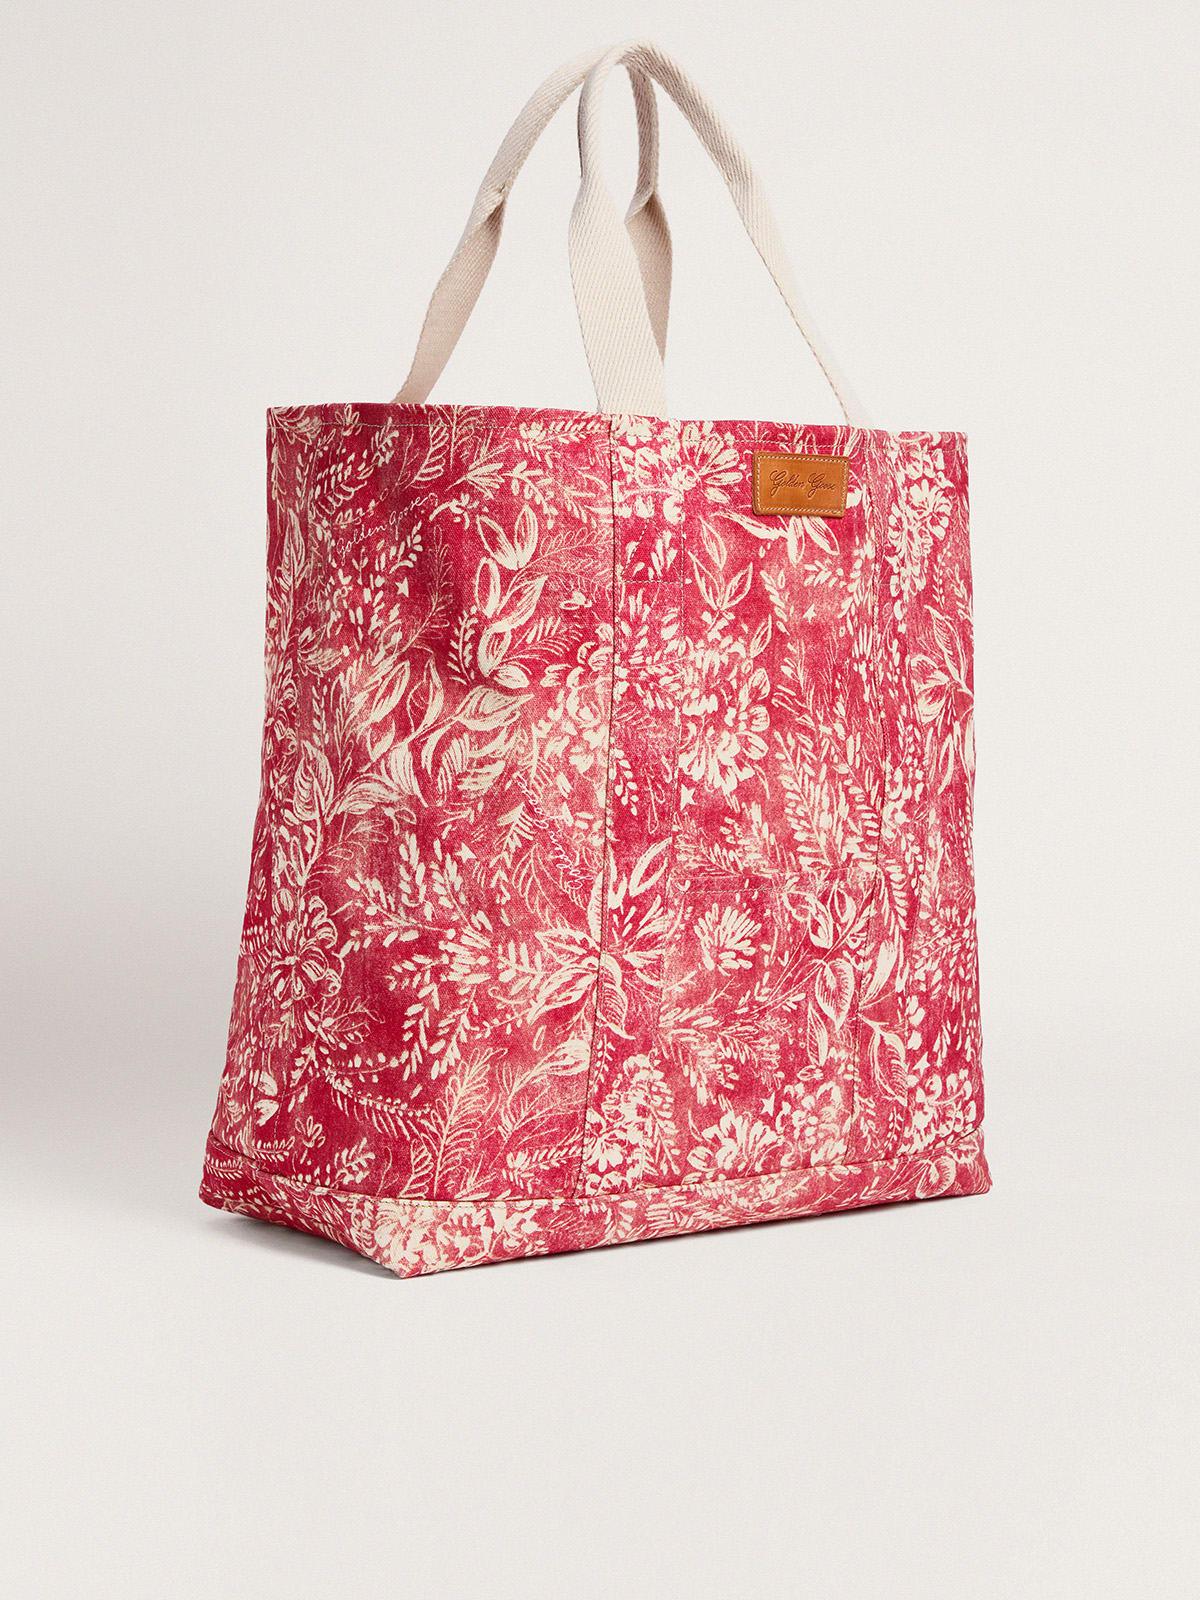 Golden Goose - Golden Resort Capsule Collection canvas Ocean bag in vintage red with contrasting white toile de jouy print in 